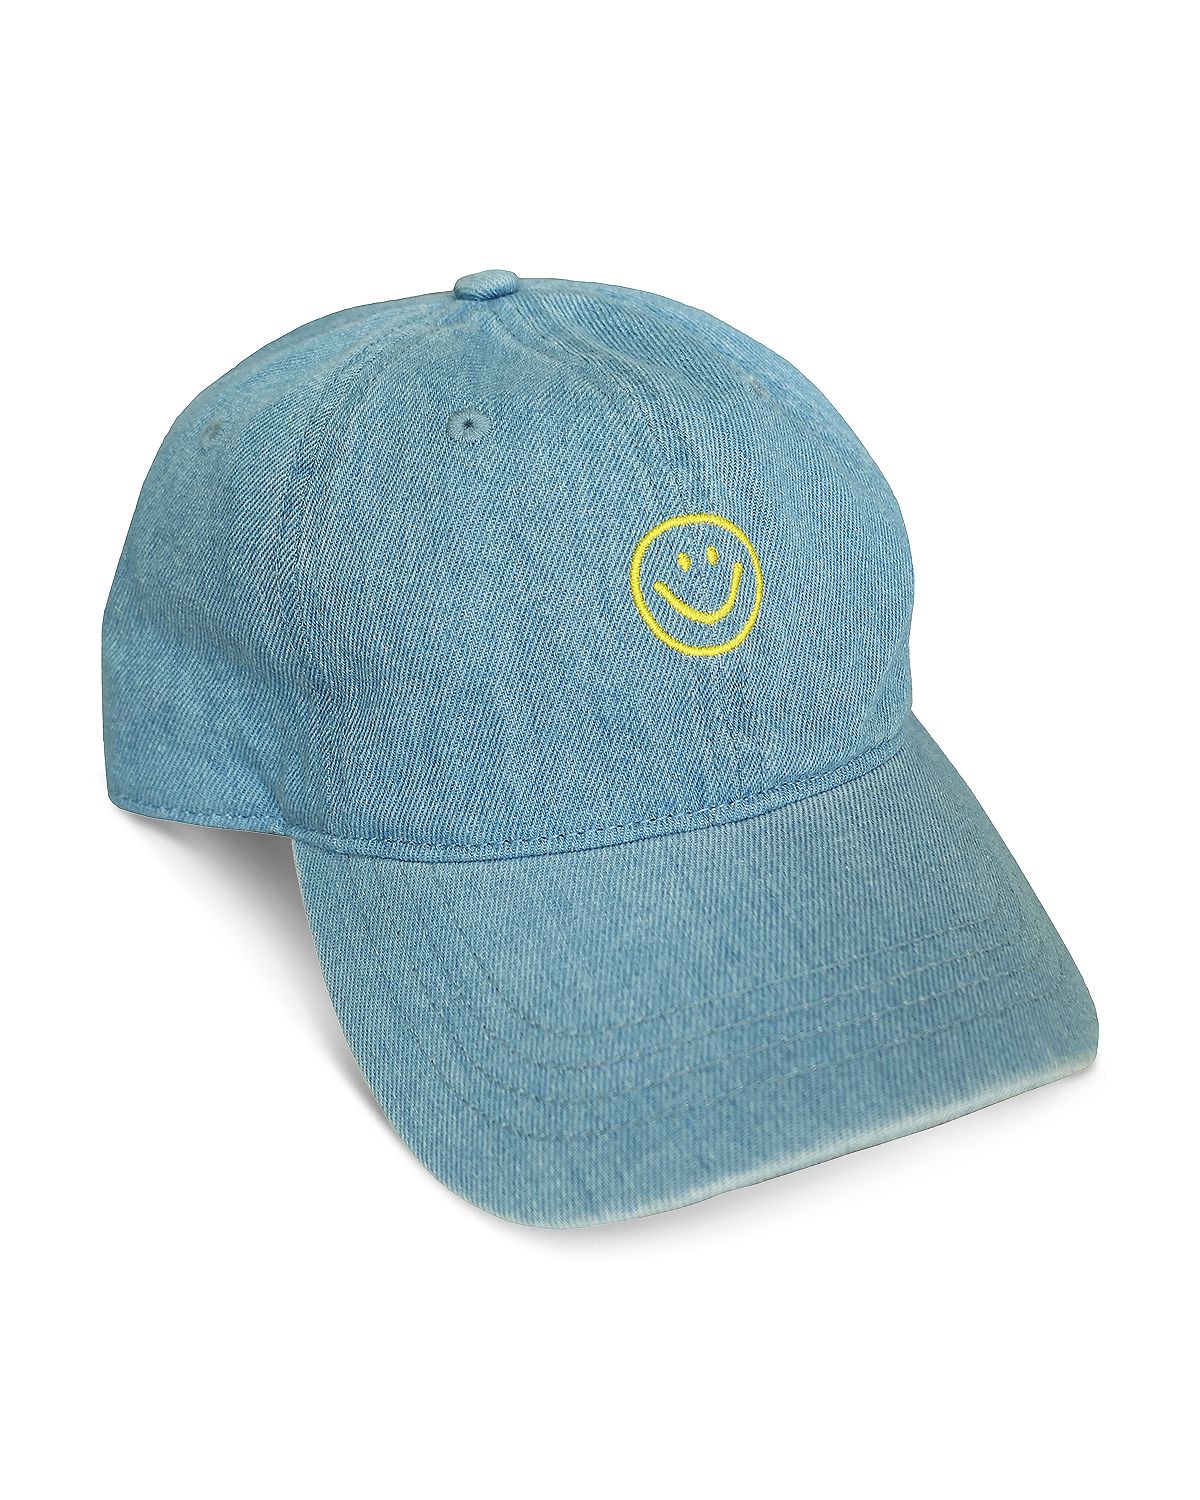 Photo 1 of KERRI ROSENTHAL Smiley Baseball Hat Denim
Caps can be adjusted +/- 7 cm using buckle strap
Embroidered smiley face
